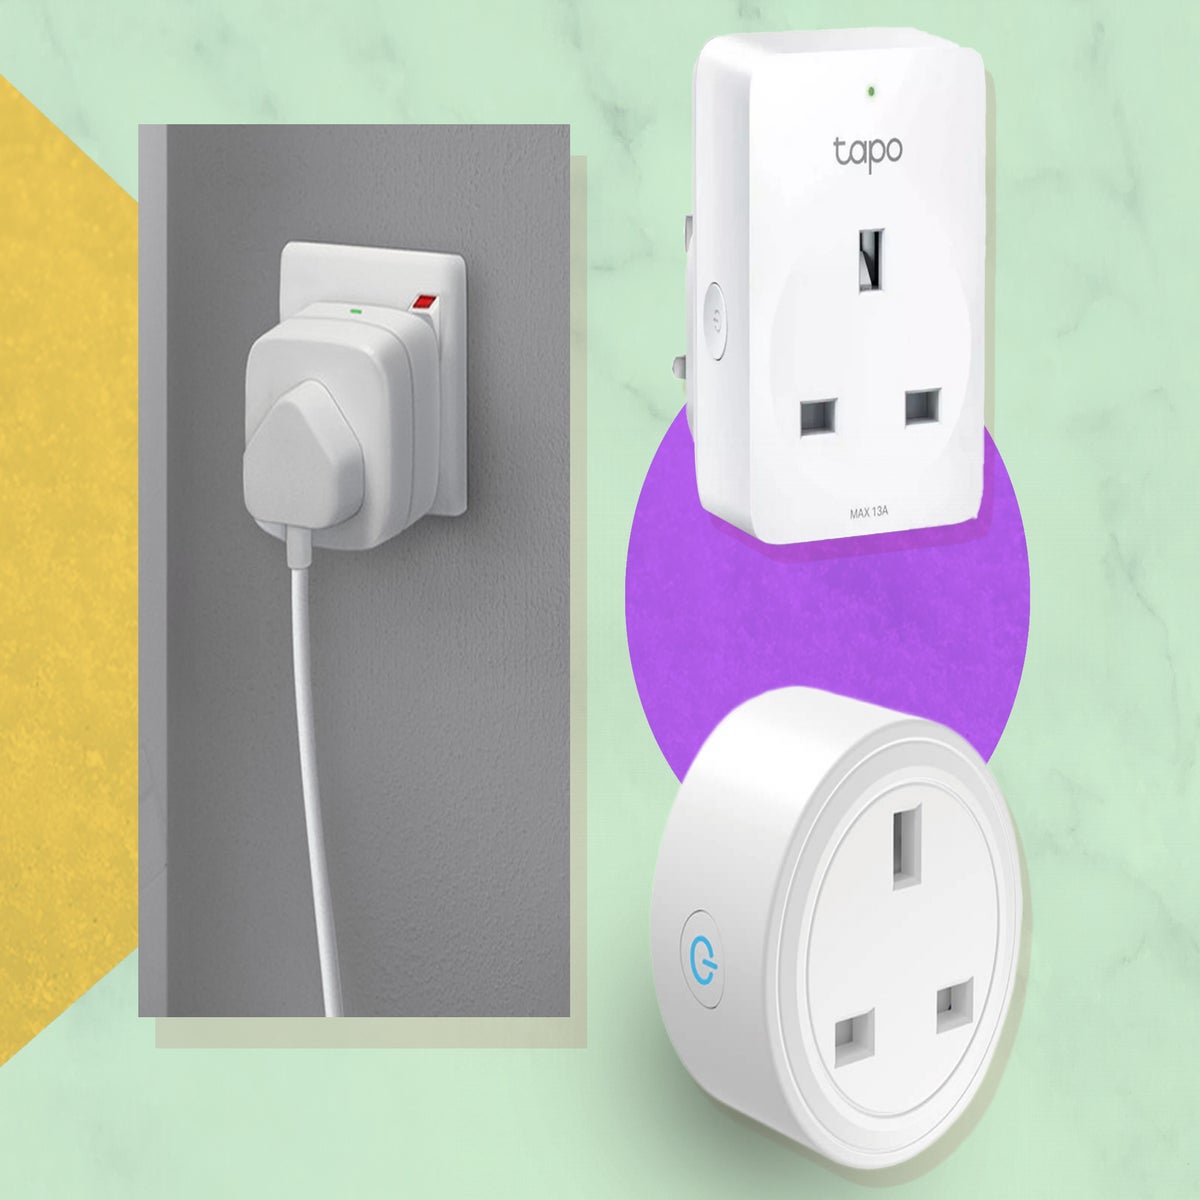 TP-Link Tapo Smart Plug review: Easy way to save money on your